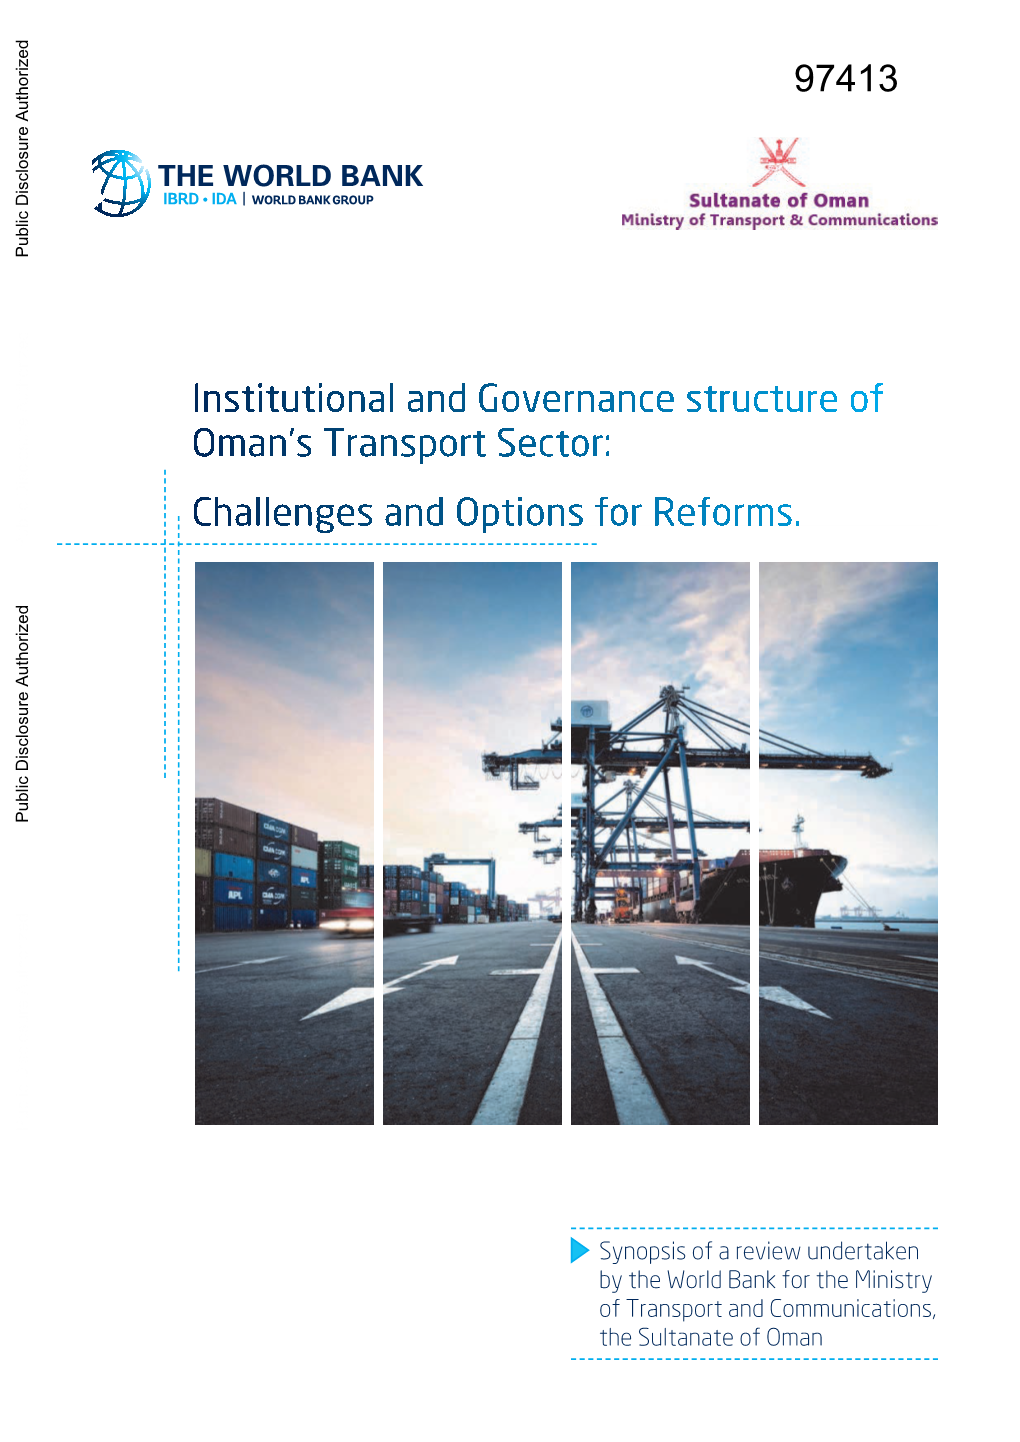 Institutional and Governance Structure of Oman's Transport Sector